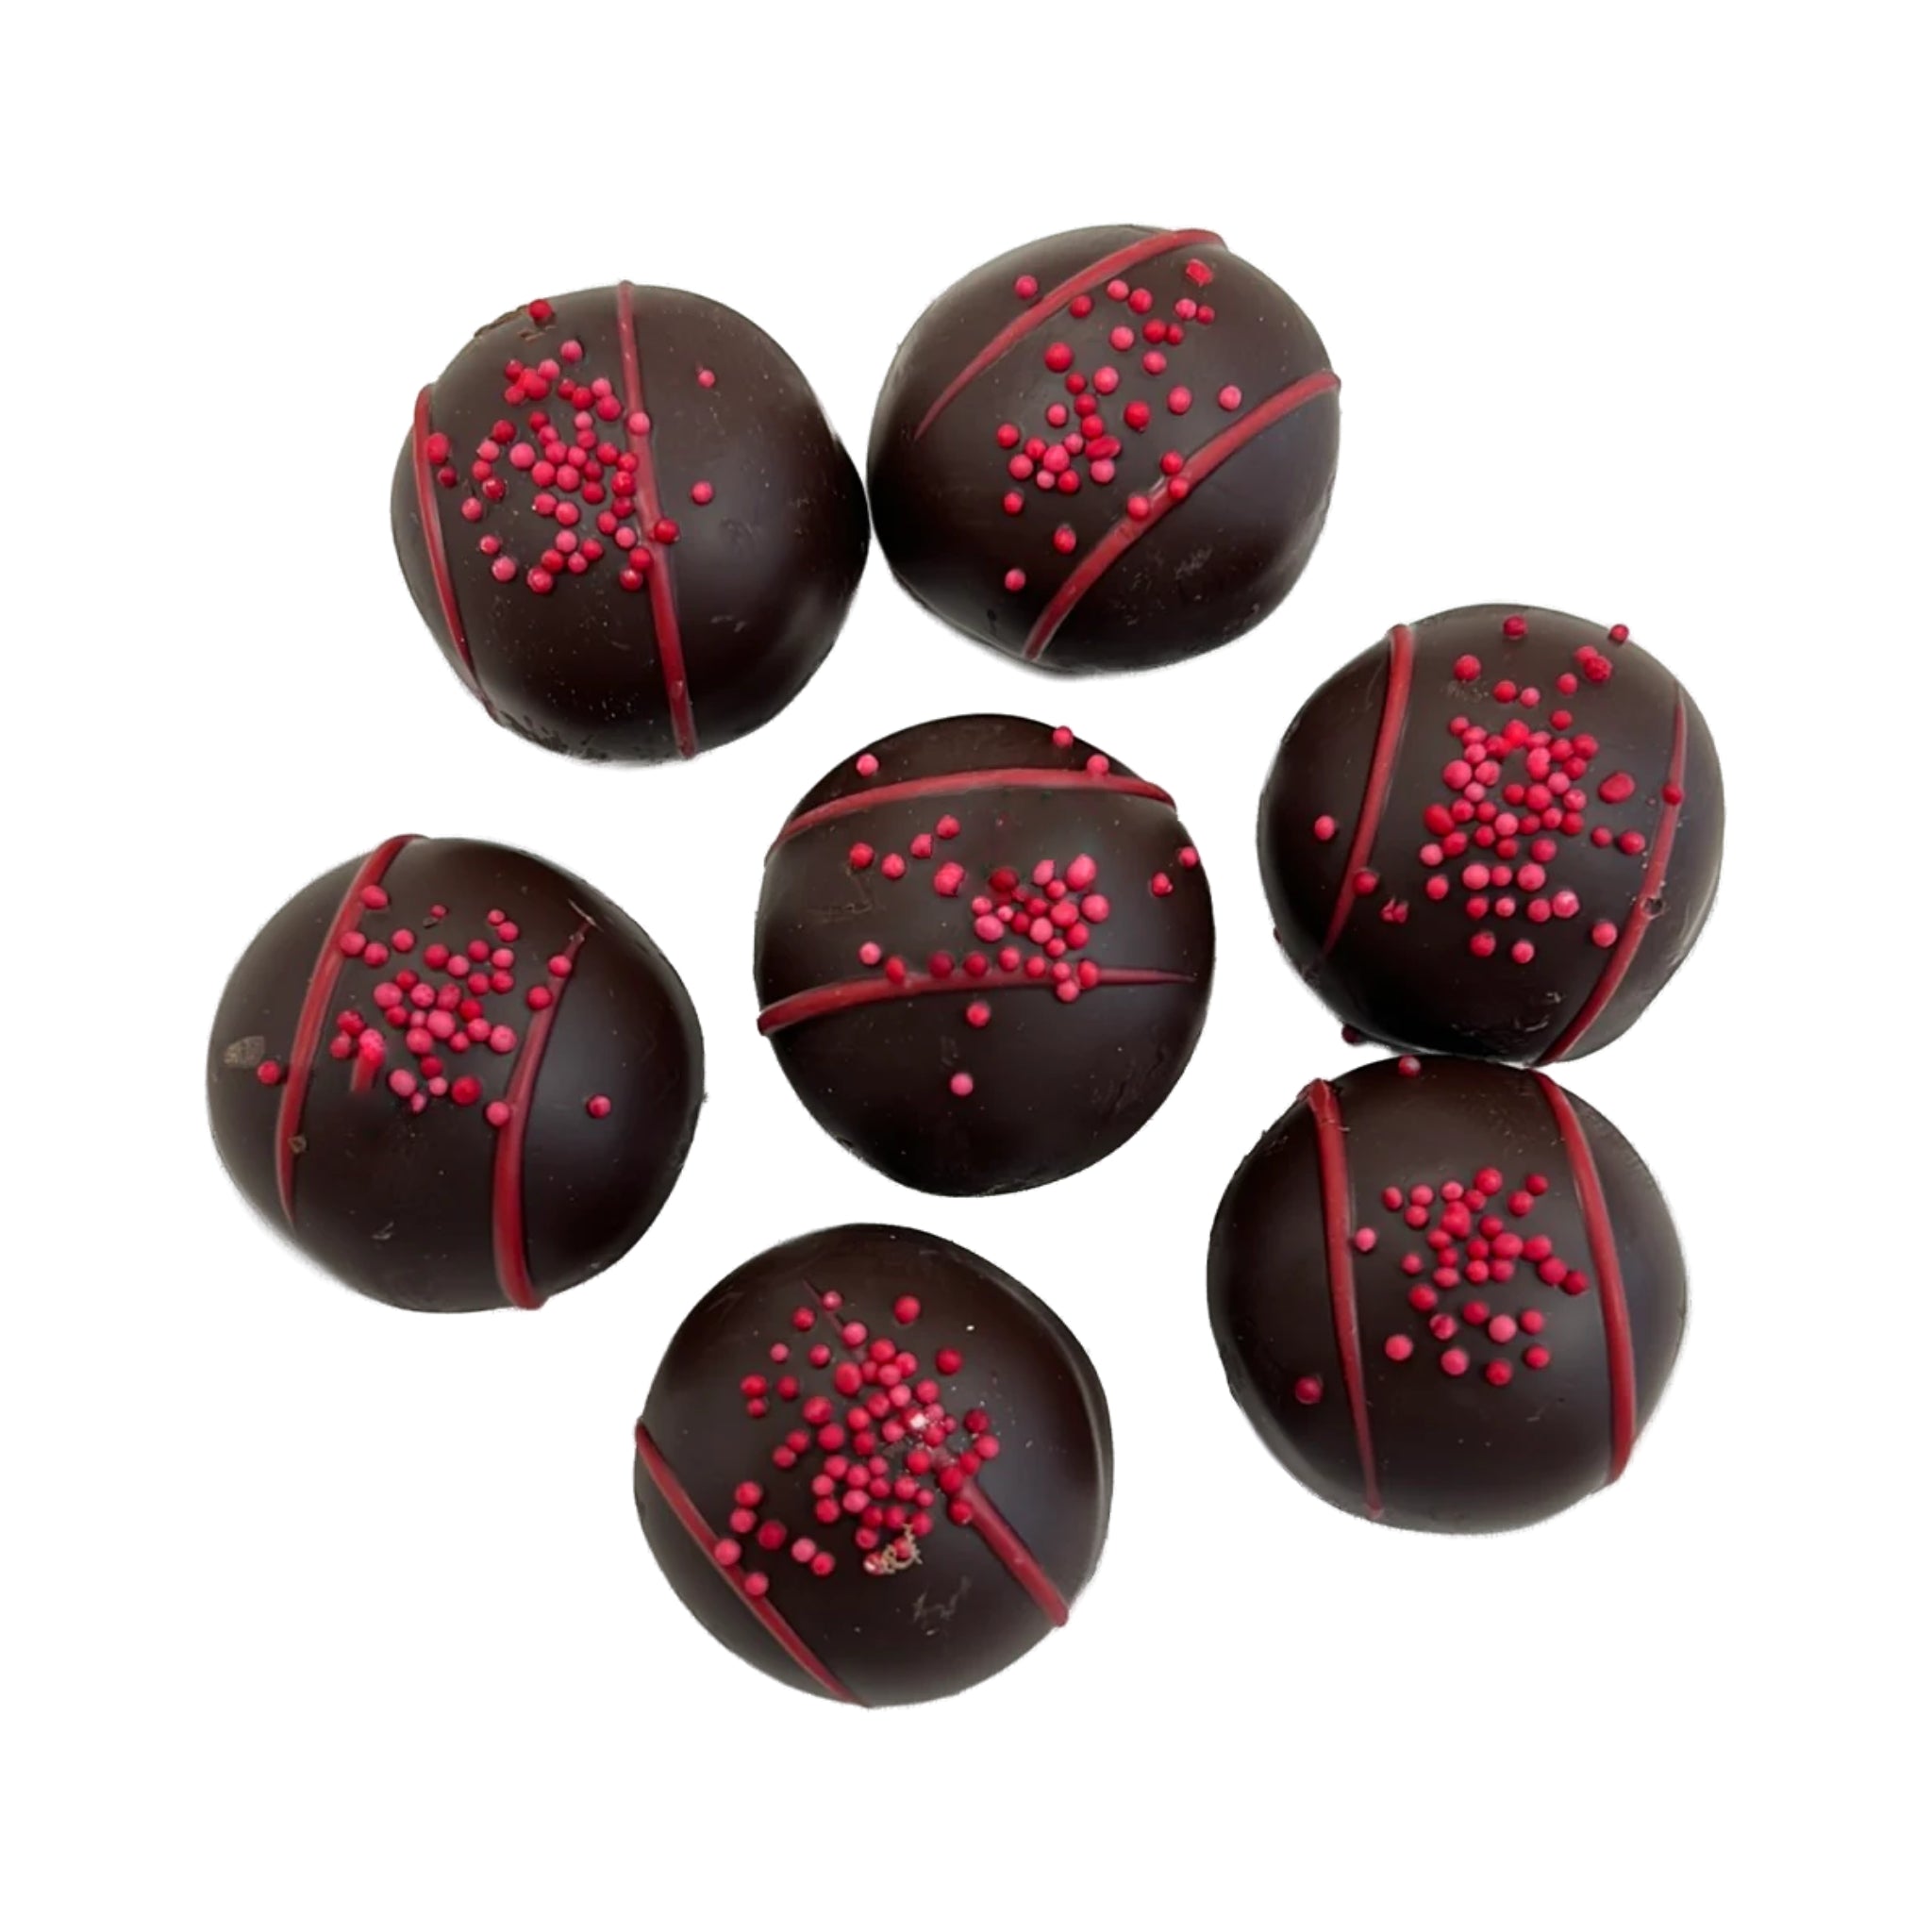 Large round marble size dark chocolate  balls with red sprinkles and red lace icing 